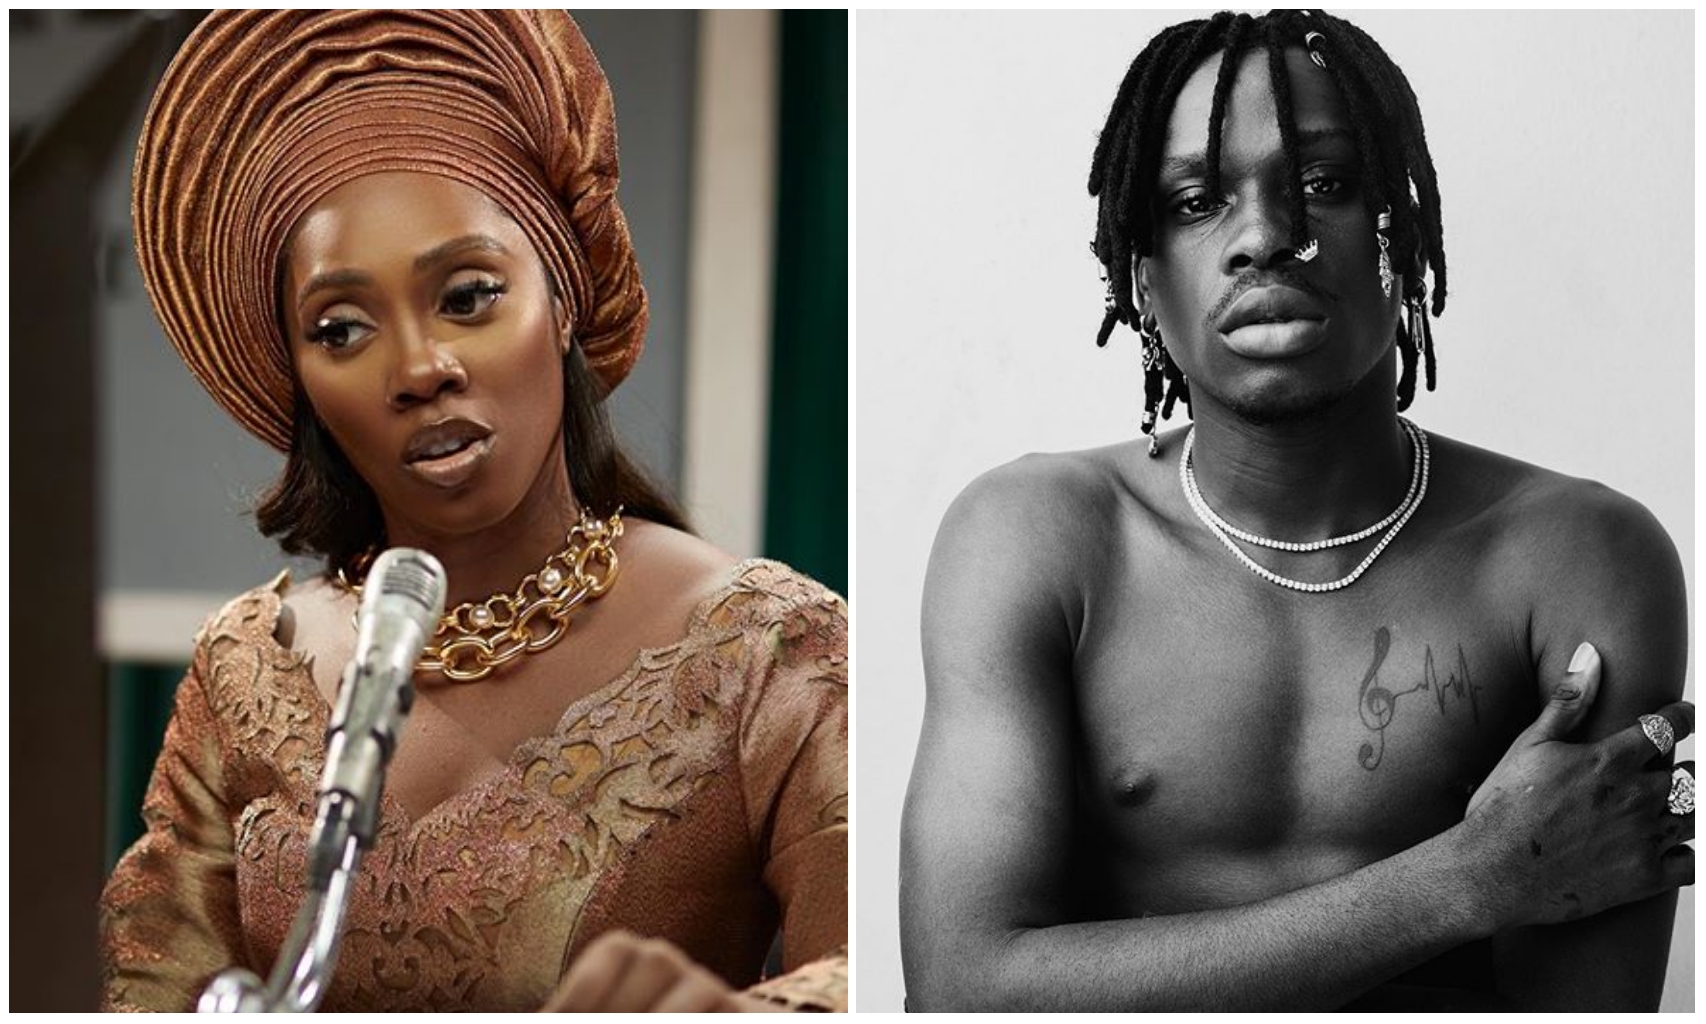 Tiwa Savage heap praise on Fireboy DML for his impact on her new single (Video)